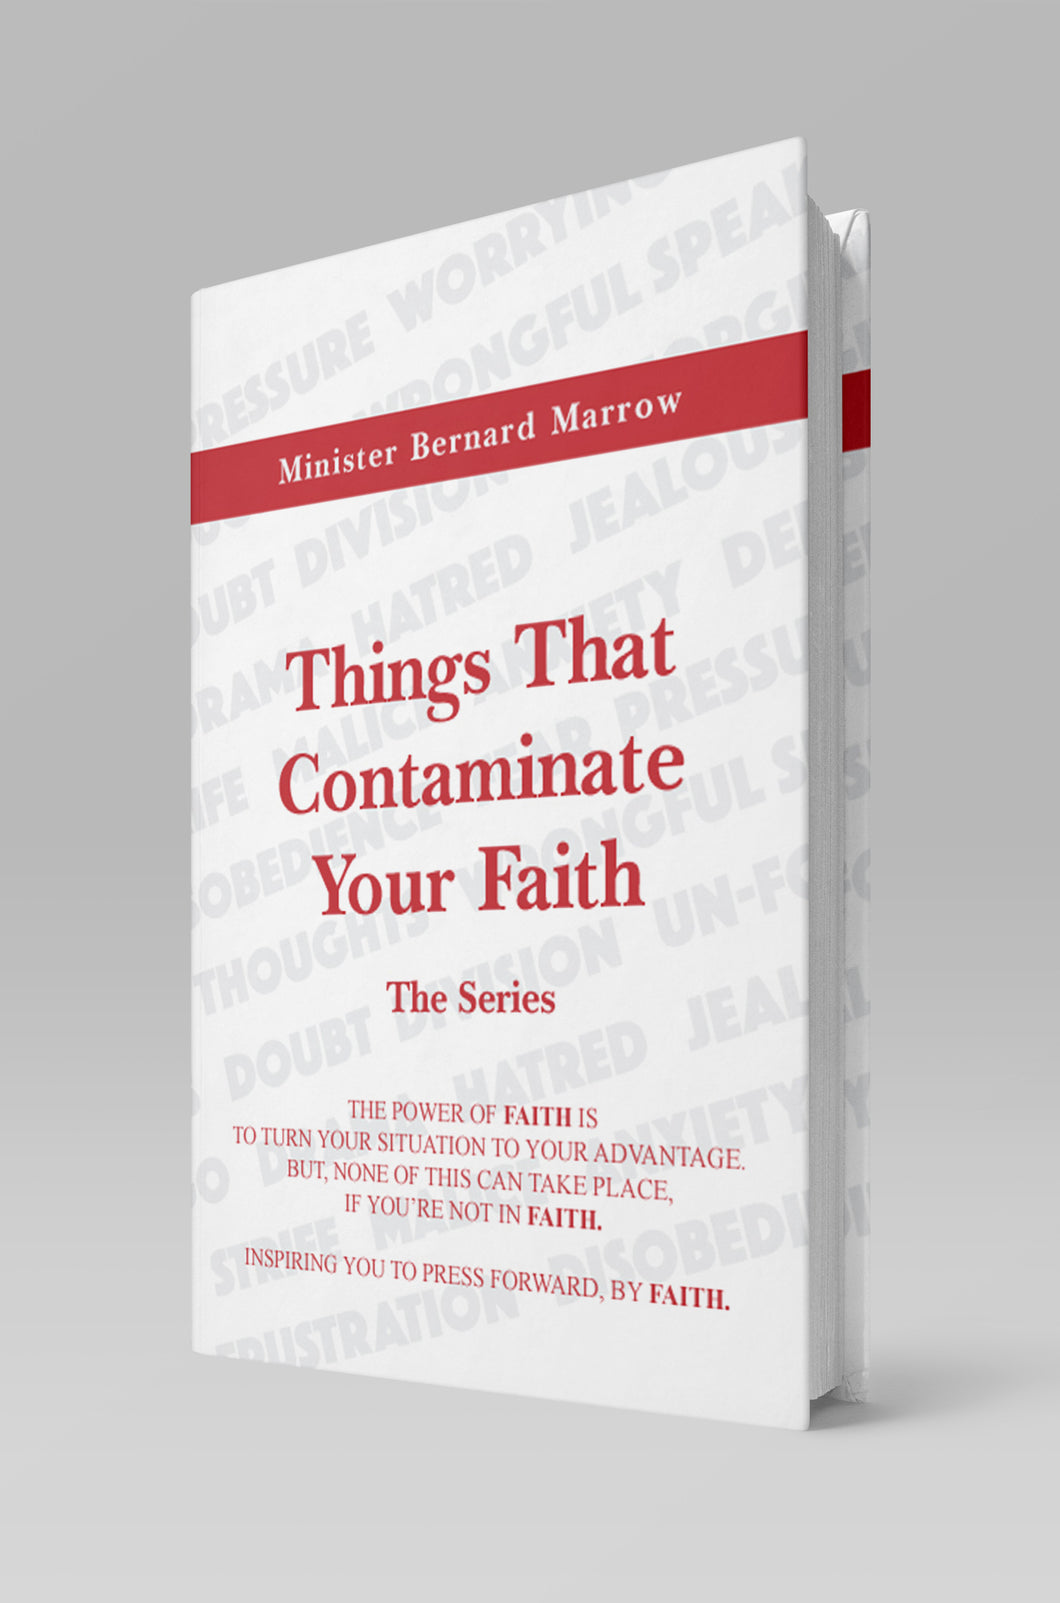 Minister Bernard Marrow “Things That Contaminate Your Faith - The Series”